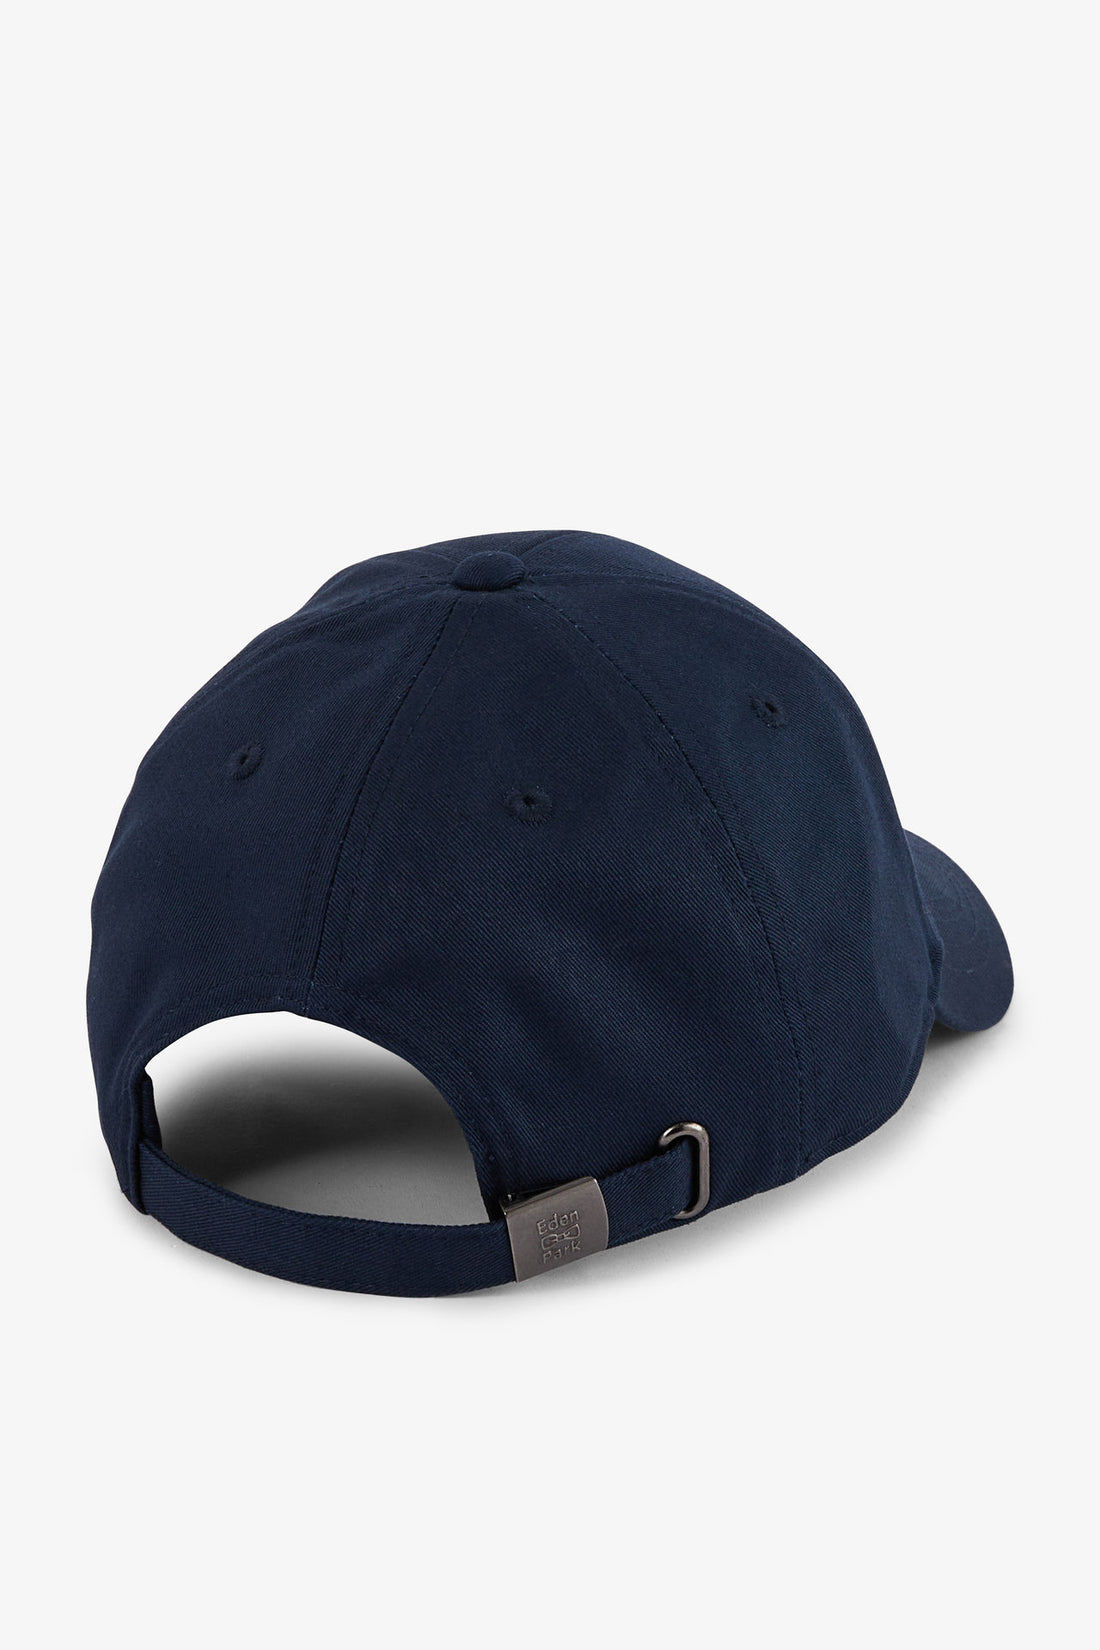 Navy Blue Cotton Canvas Cap With Bow Tie Embroidery_E24CHACA0001_BLF1_02